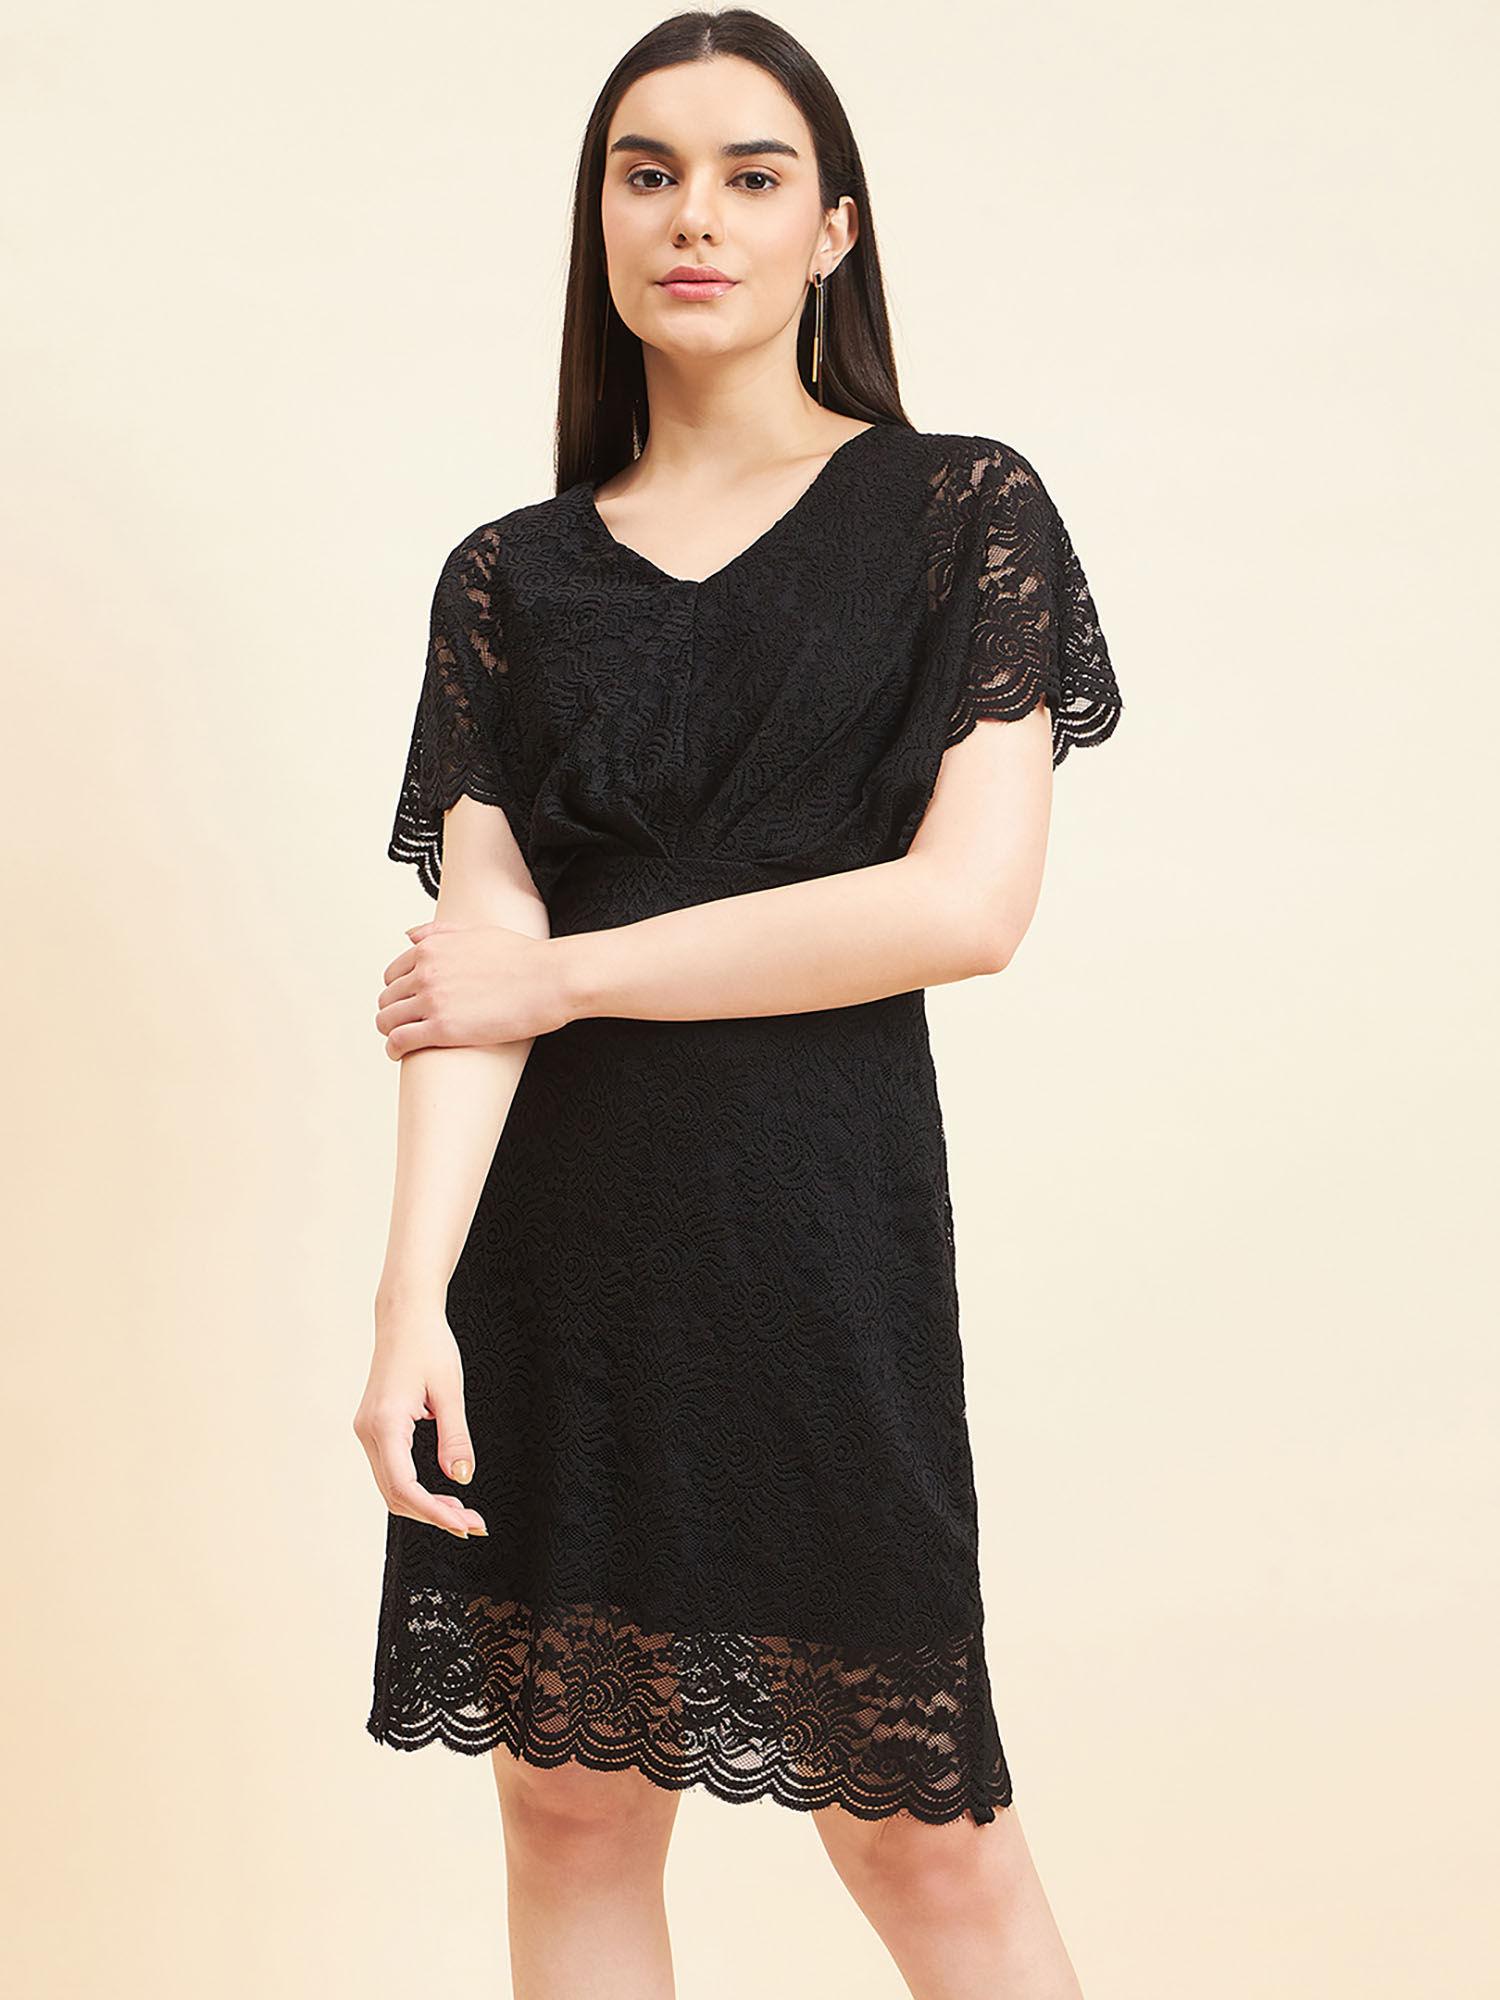 women-solid-front-frill-knee-lace-black-dress